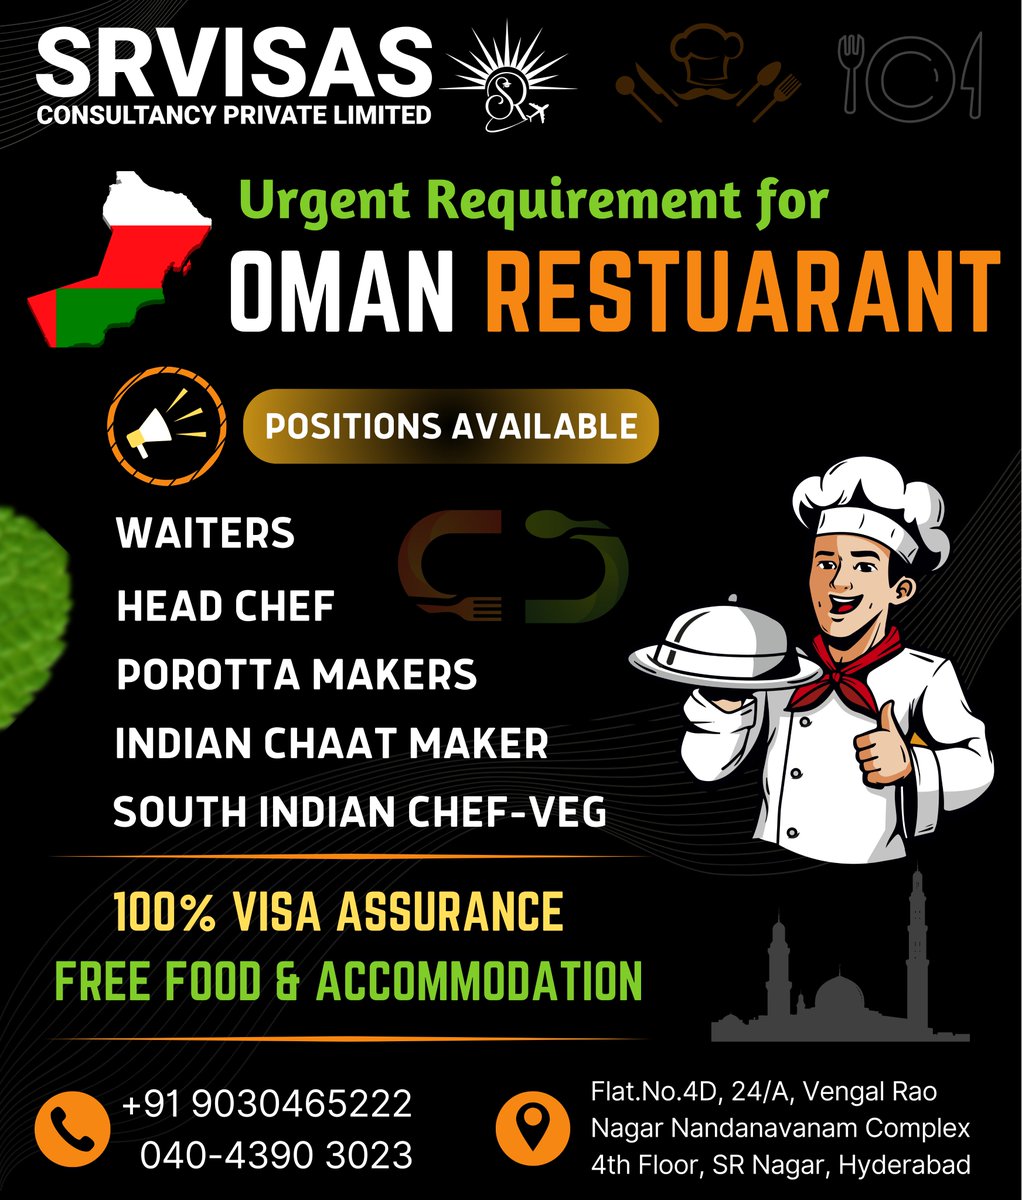 Urgent Requirement for OMAN Restaurant. Available Positions are
=> Waiters
=> Head Chef
=> Parotta Makers
=> Indian Chat Maker
=> South Indian Chef-Veg
#VisaExpert #VisaConsultation #VisaApplication #WorkVisa #VisaProcess #VisaSupport #TravelWithEase #VisaExperts